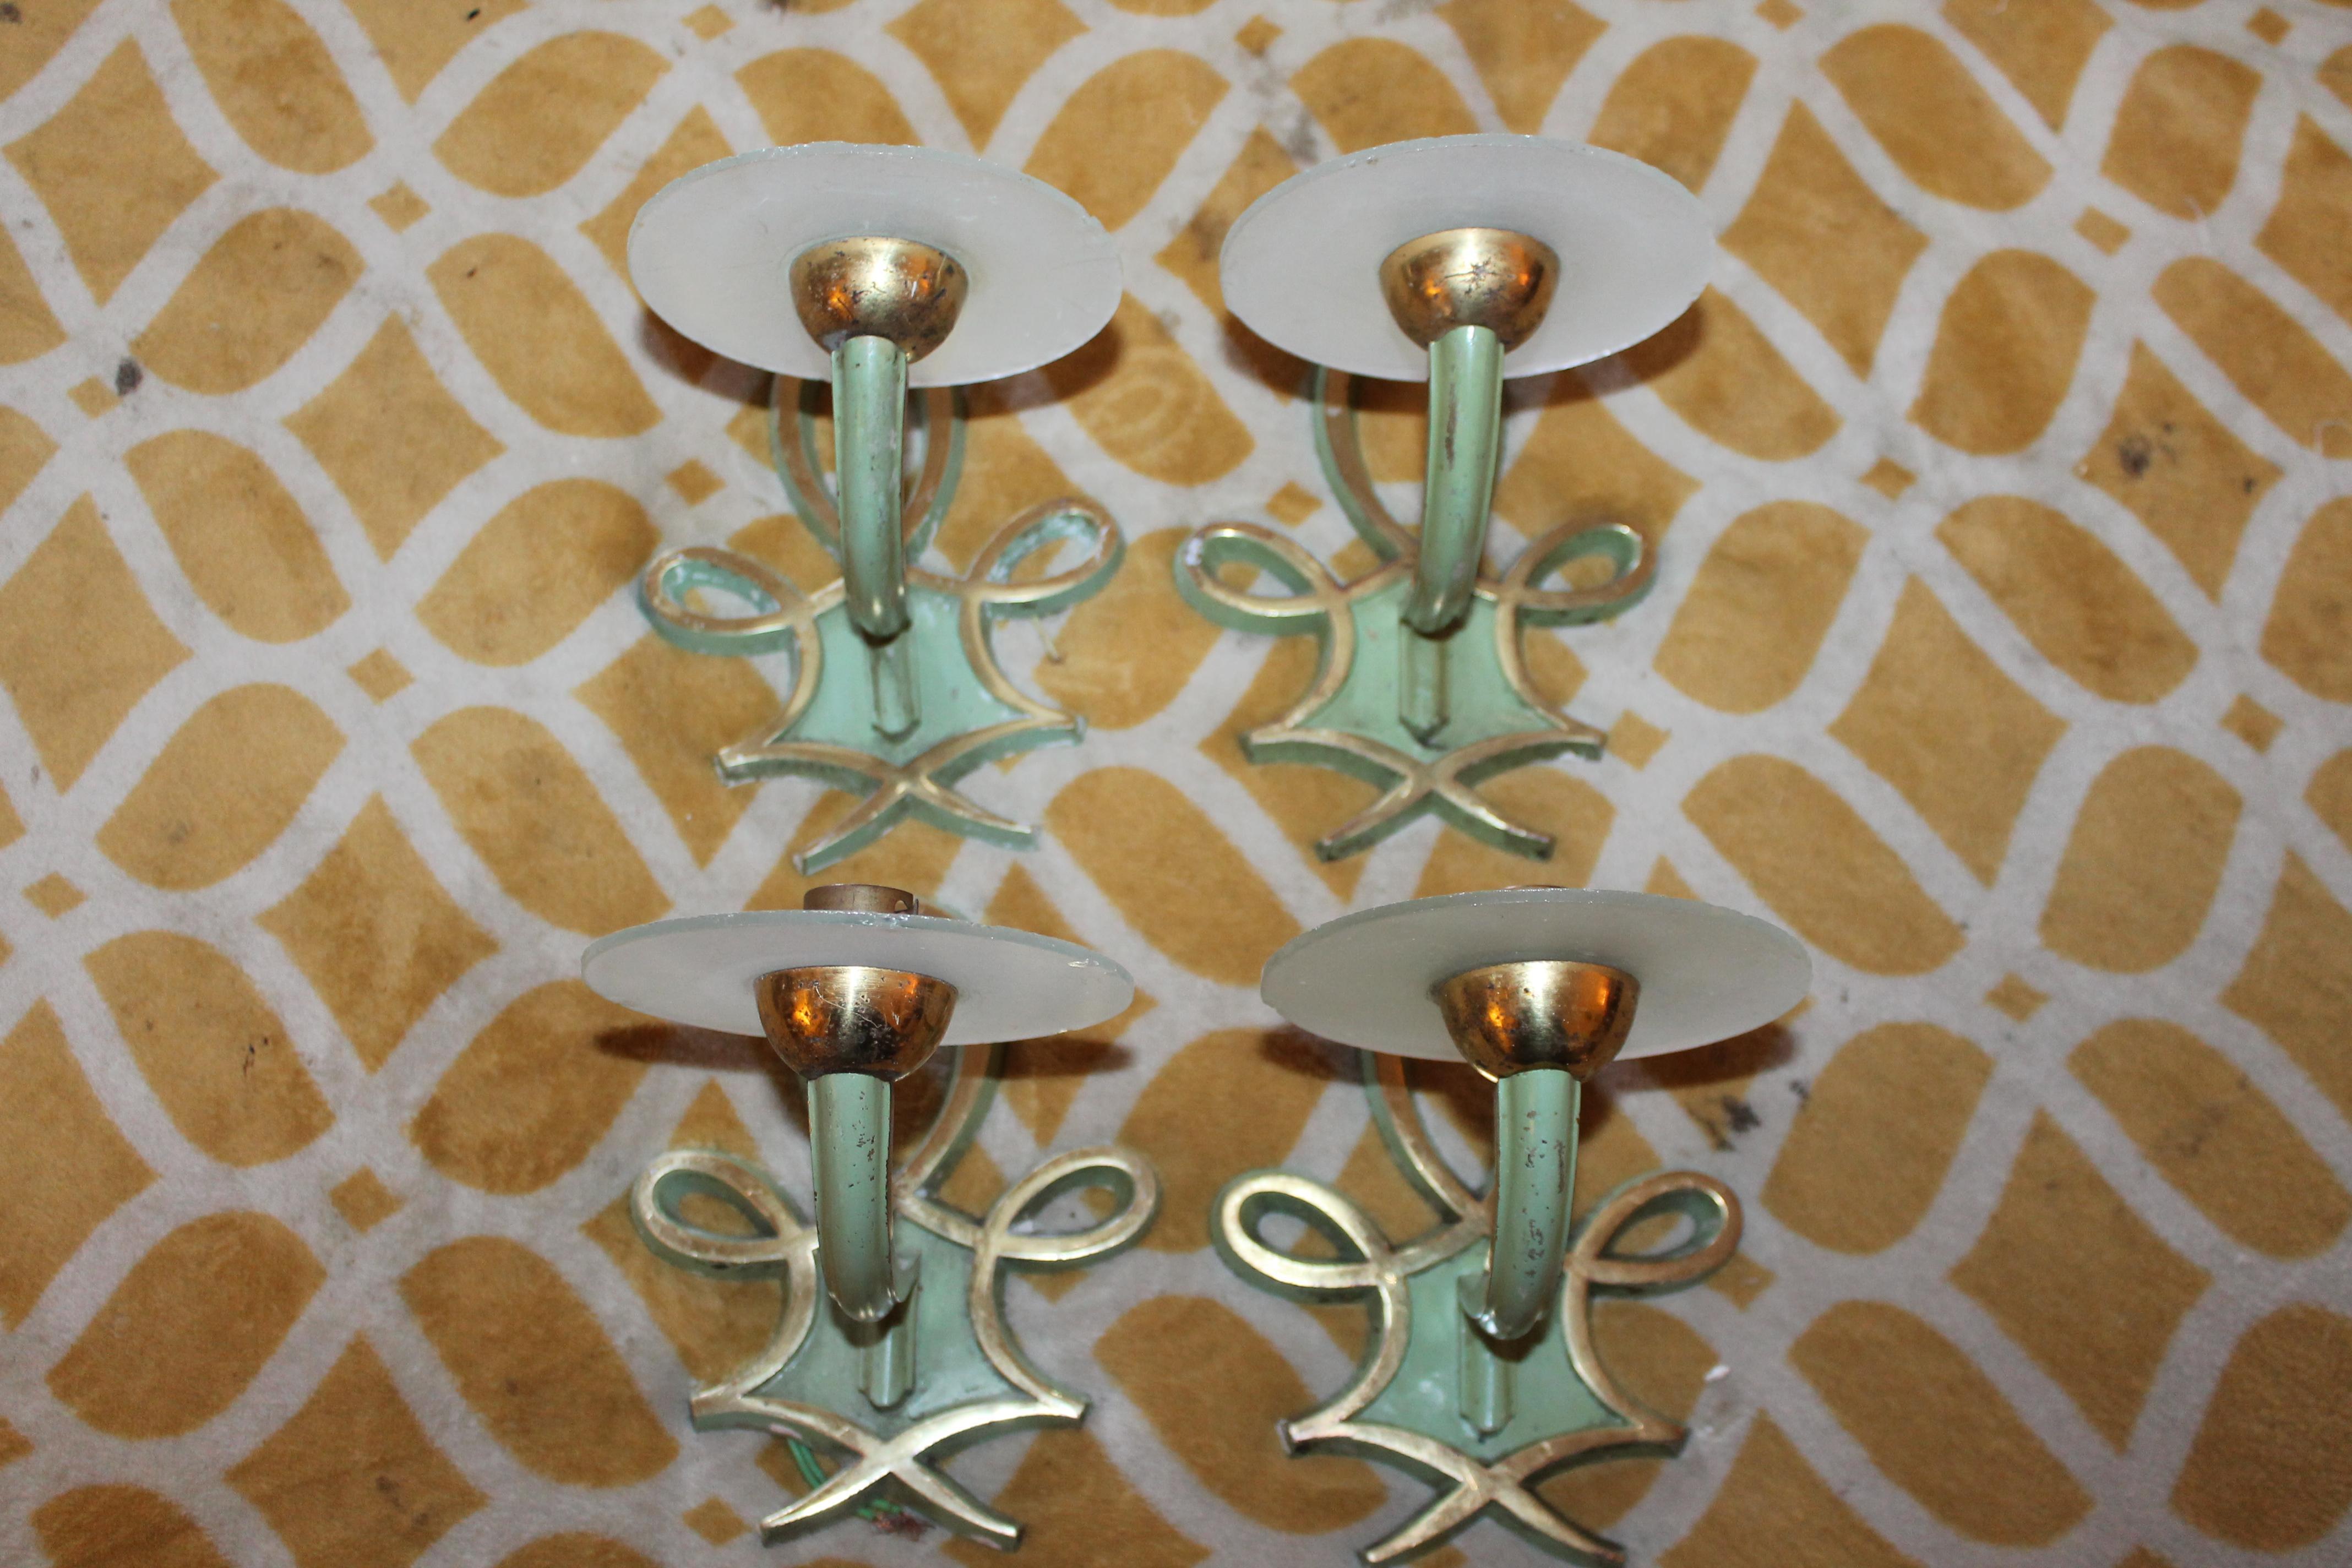 Matched Set of 4 French Art Deco Gilt & Patinated Wall Sconces attributed to Jules Leleu. Futuristic Glass discs.